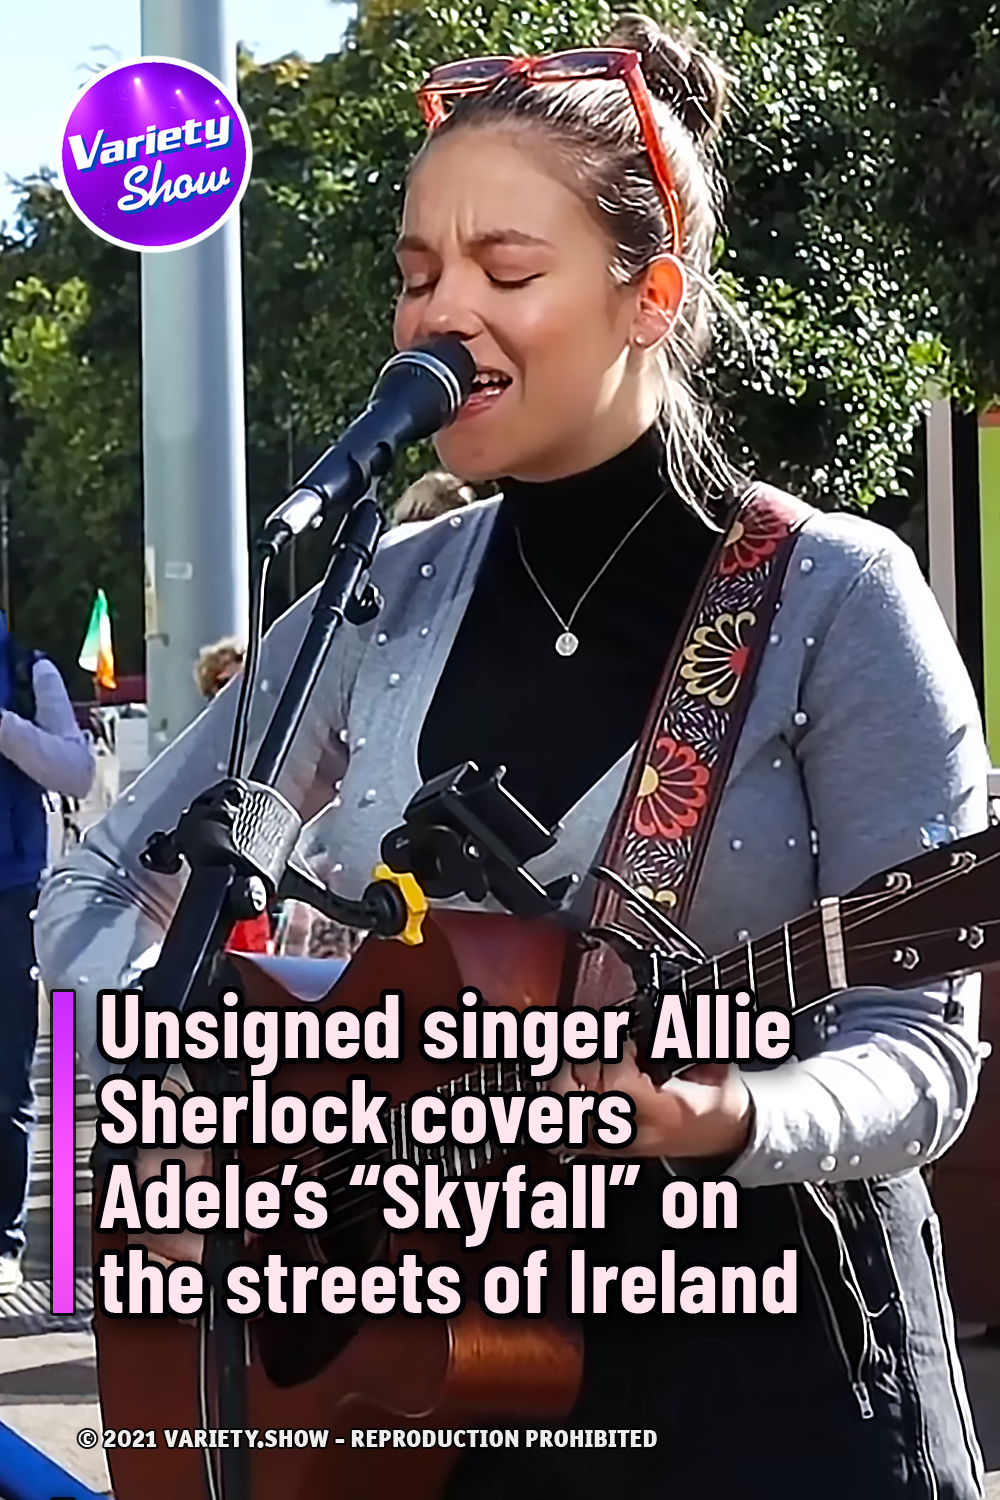 Unsigned singer Allie Sherlock covers Adele’s “Skyfall” on the streets of Ireland